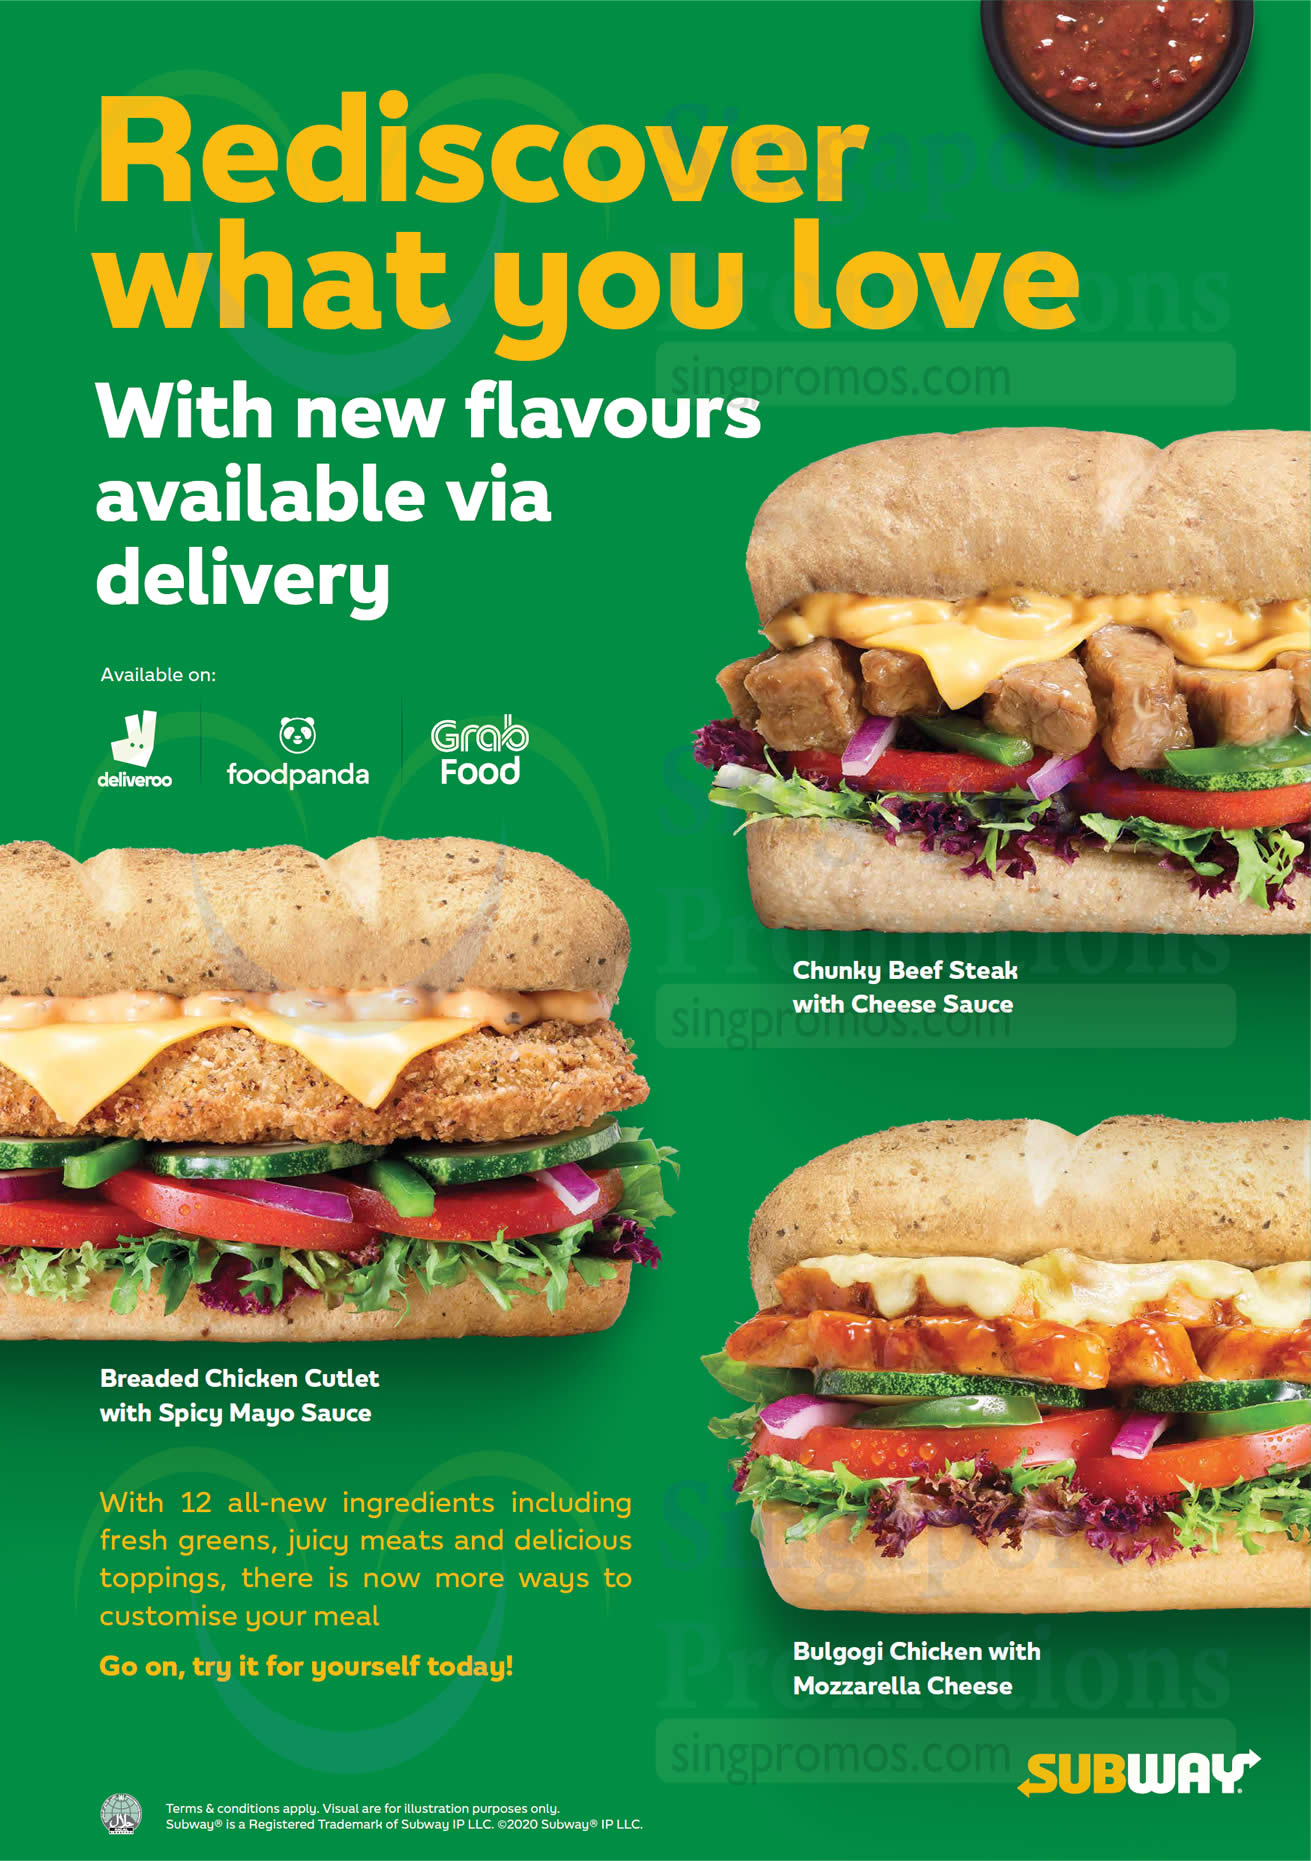 subway extends their takeaway coupon deals including the 1 for 1